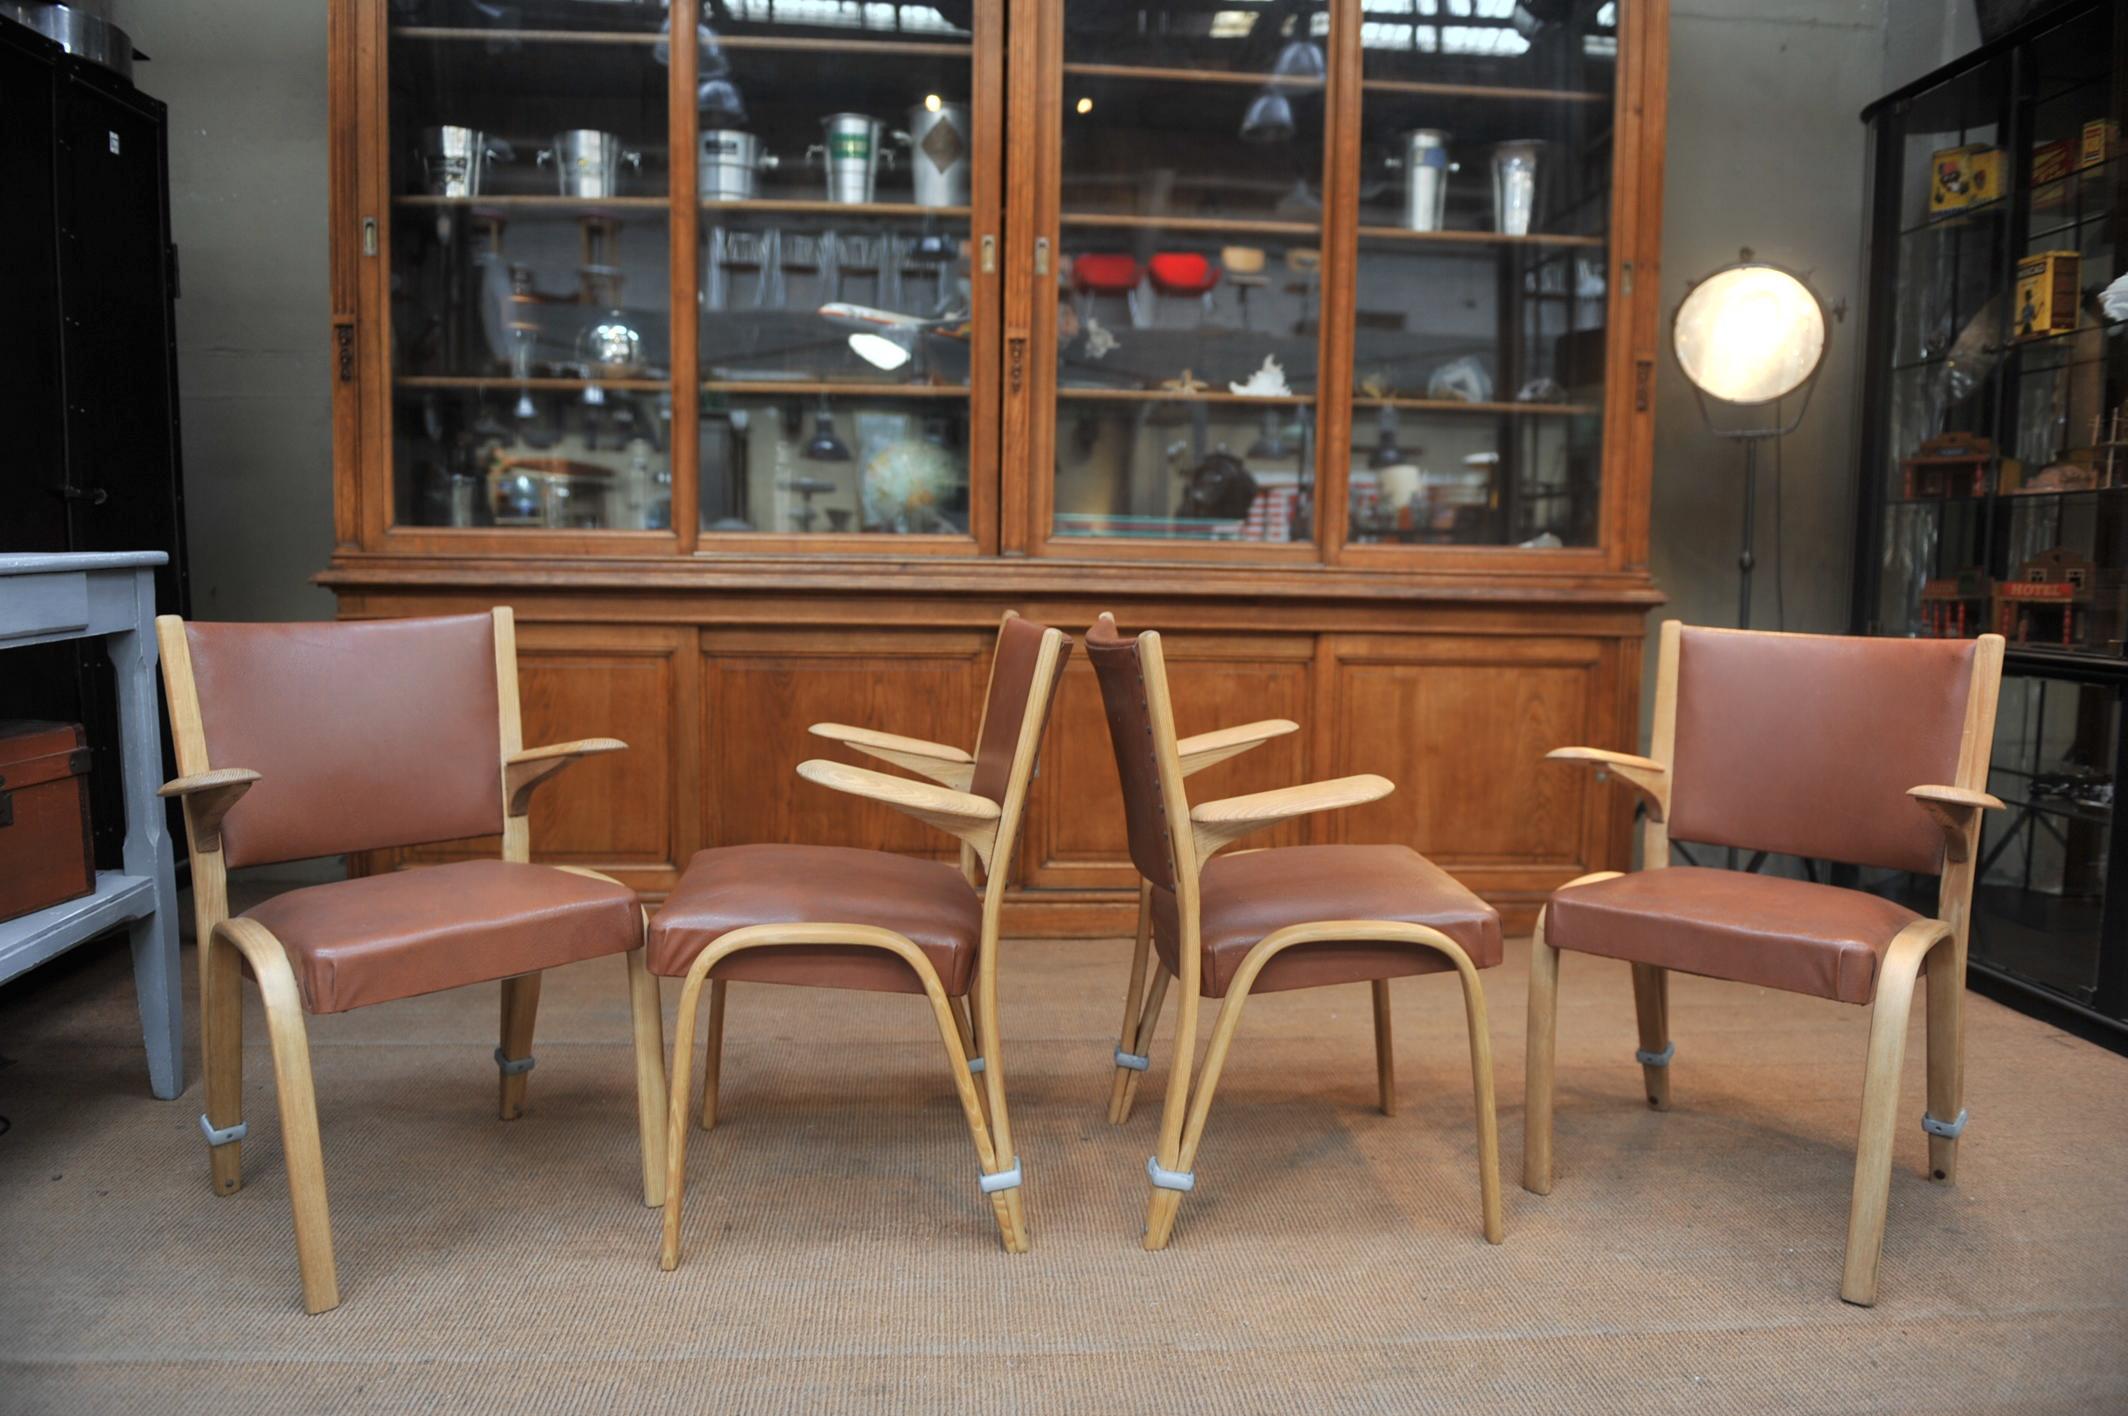 Set of four armchairs by Bow-Wood Villeneuve St George (FRANCE) . Elm wood structure and faux leather seat an back . very comfortable . circa 1950 send and waxed finish. one armchair has 2 front feet used .